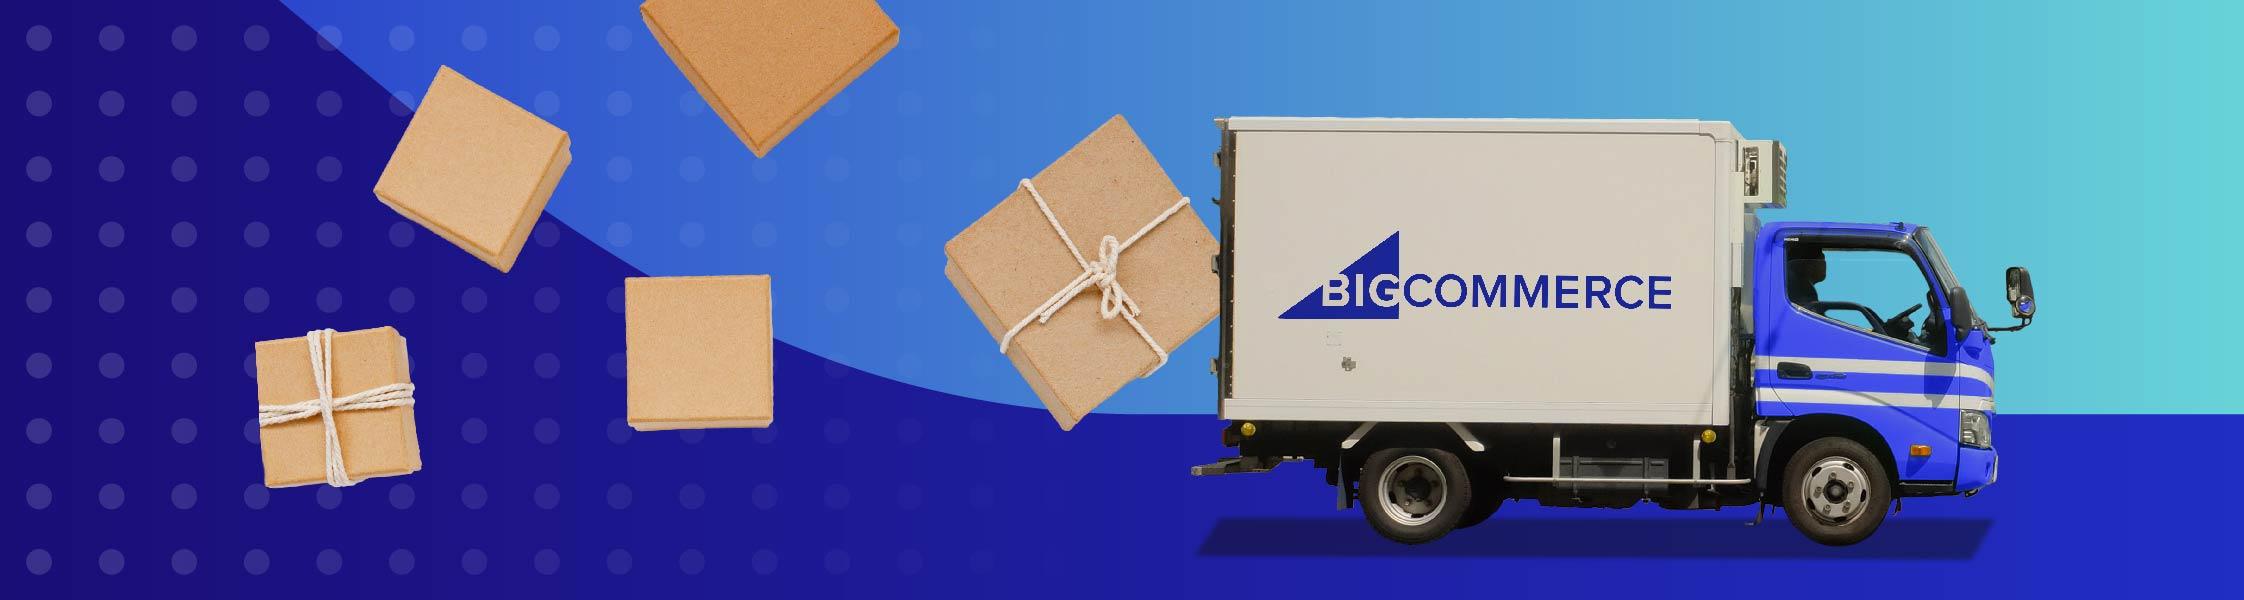 Article header wholesale ecommerce shipping boxes moving truck bigcommerce